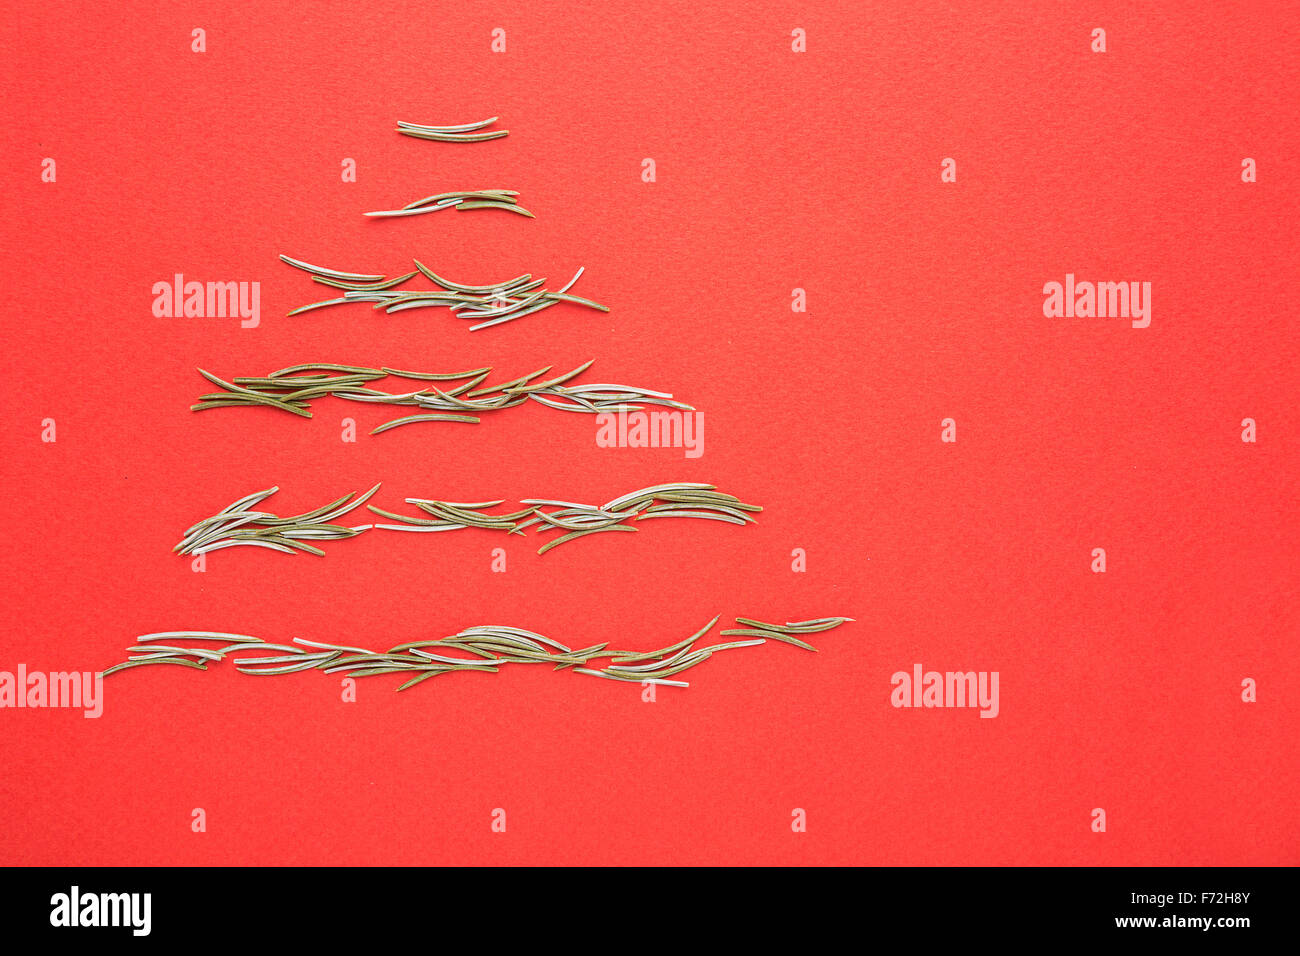 Christmas tree made from fir needles on red background Stock Photo